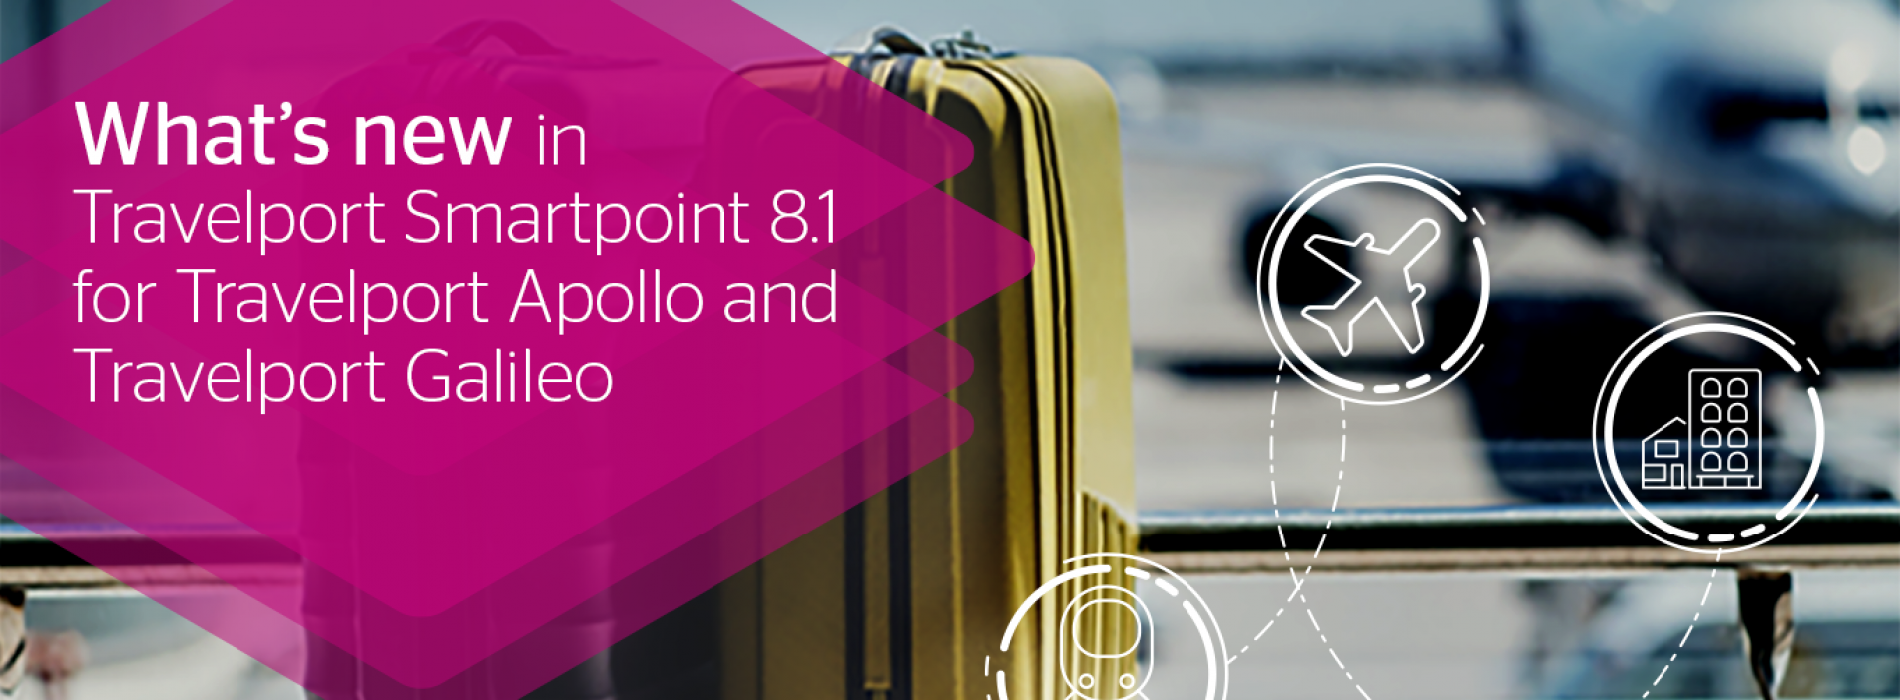 Travelport Smartpoint 8.1- A smarter way to the top